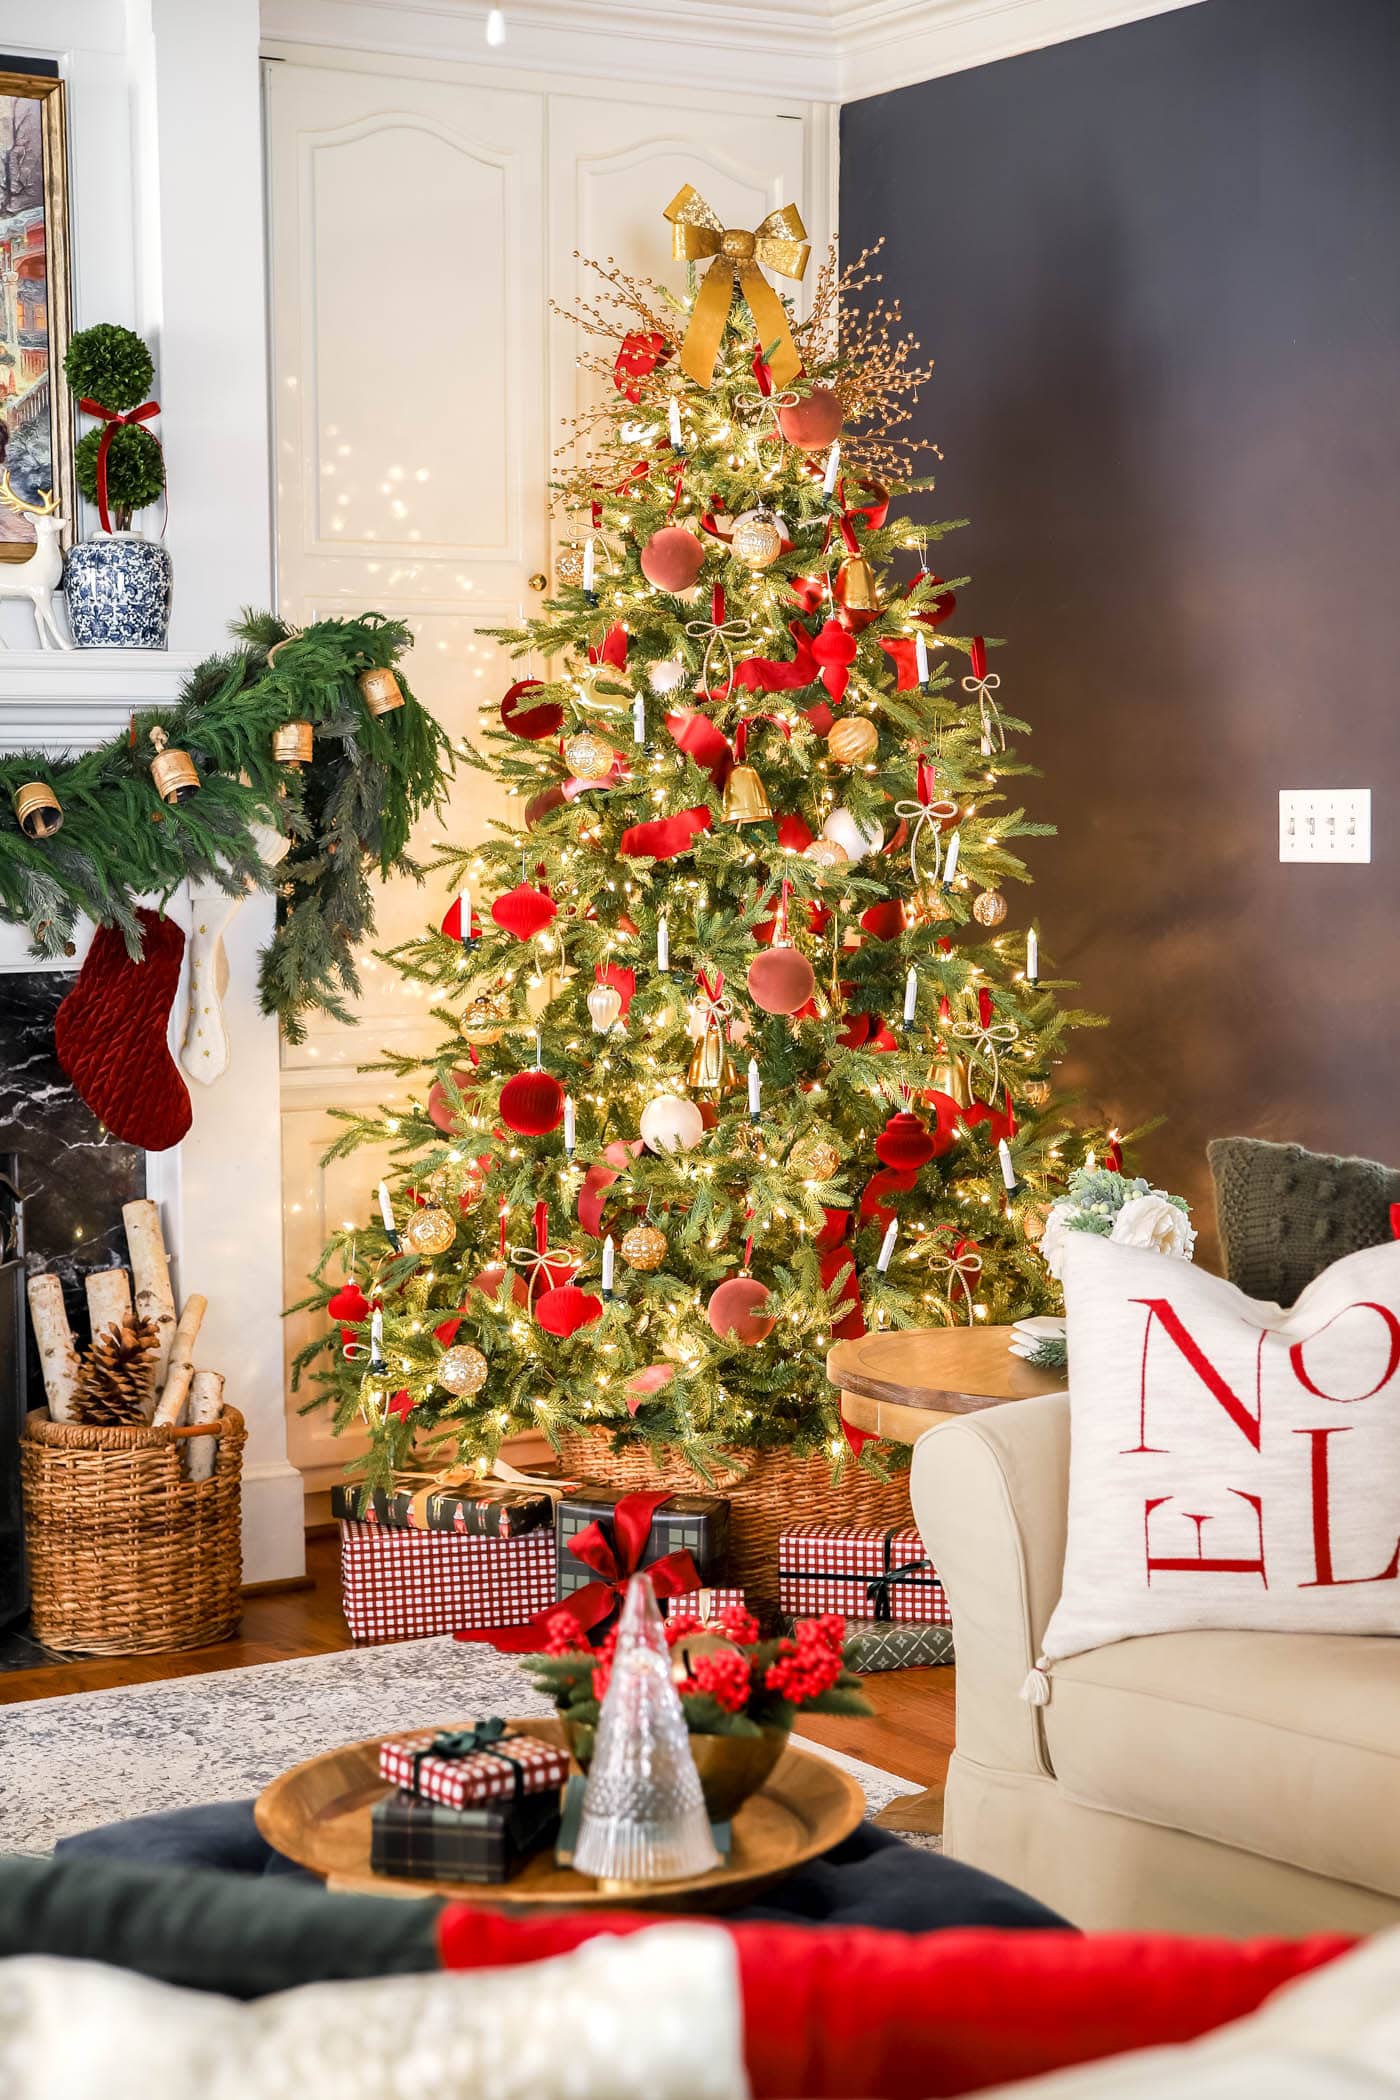 Red, White & Gold Christmas Tree Decor